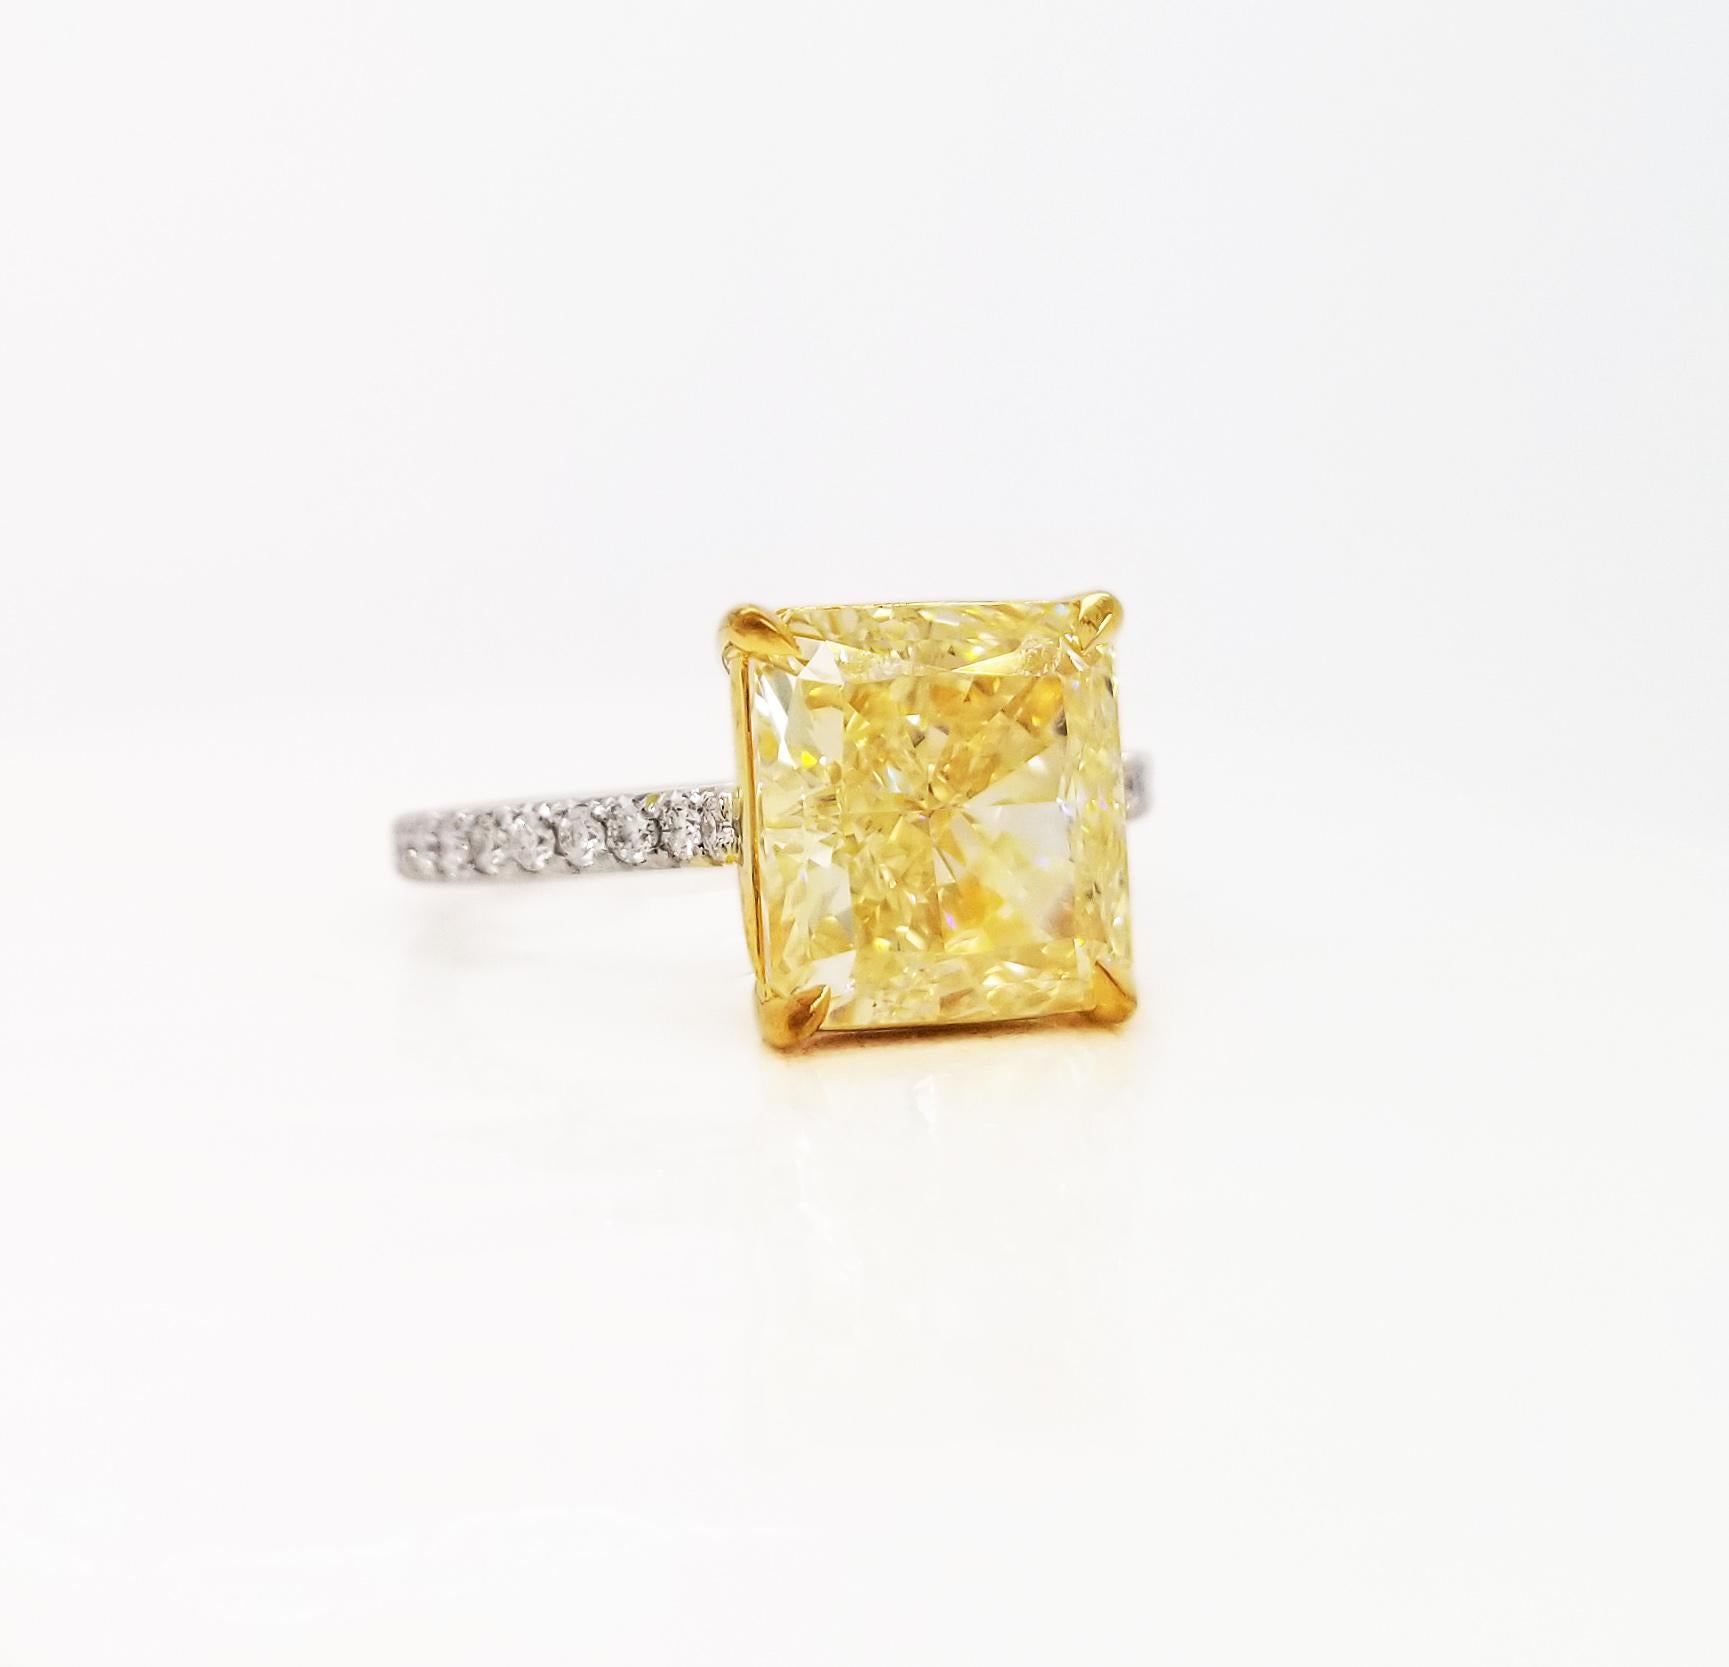 Radiant Cut Scarselli 4 Carat Fancy Light Yellow Solitaire Platinum Ring